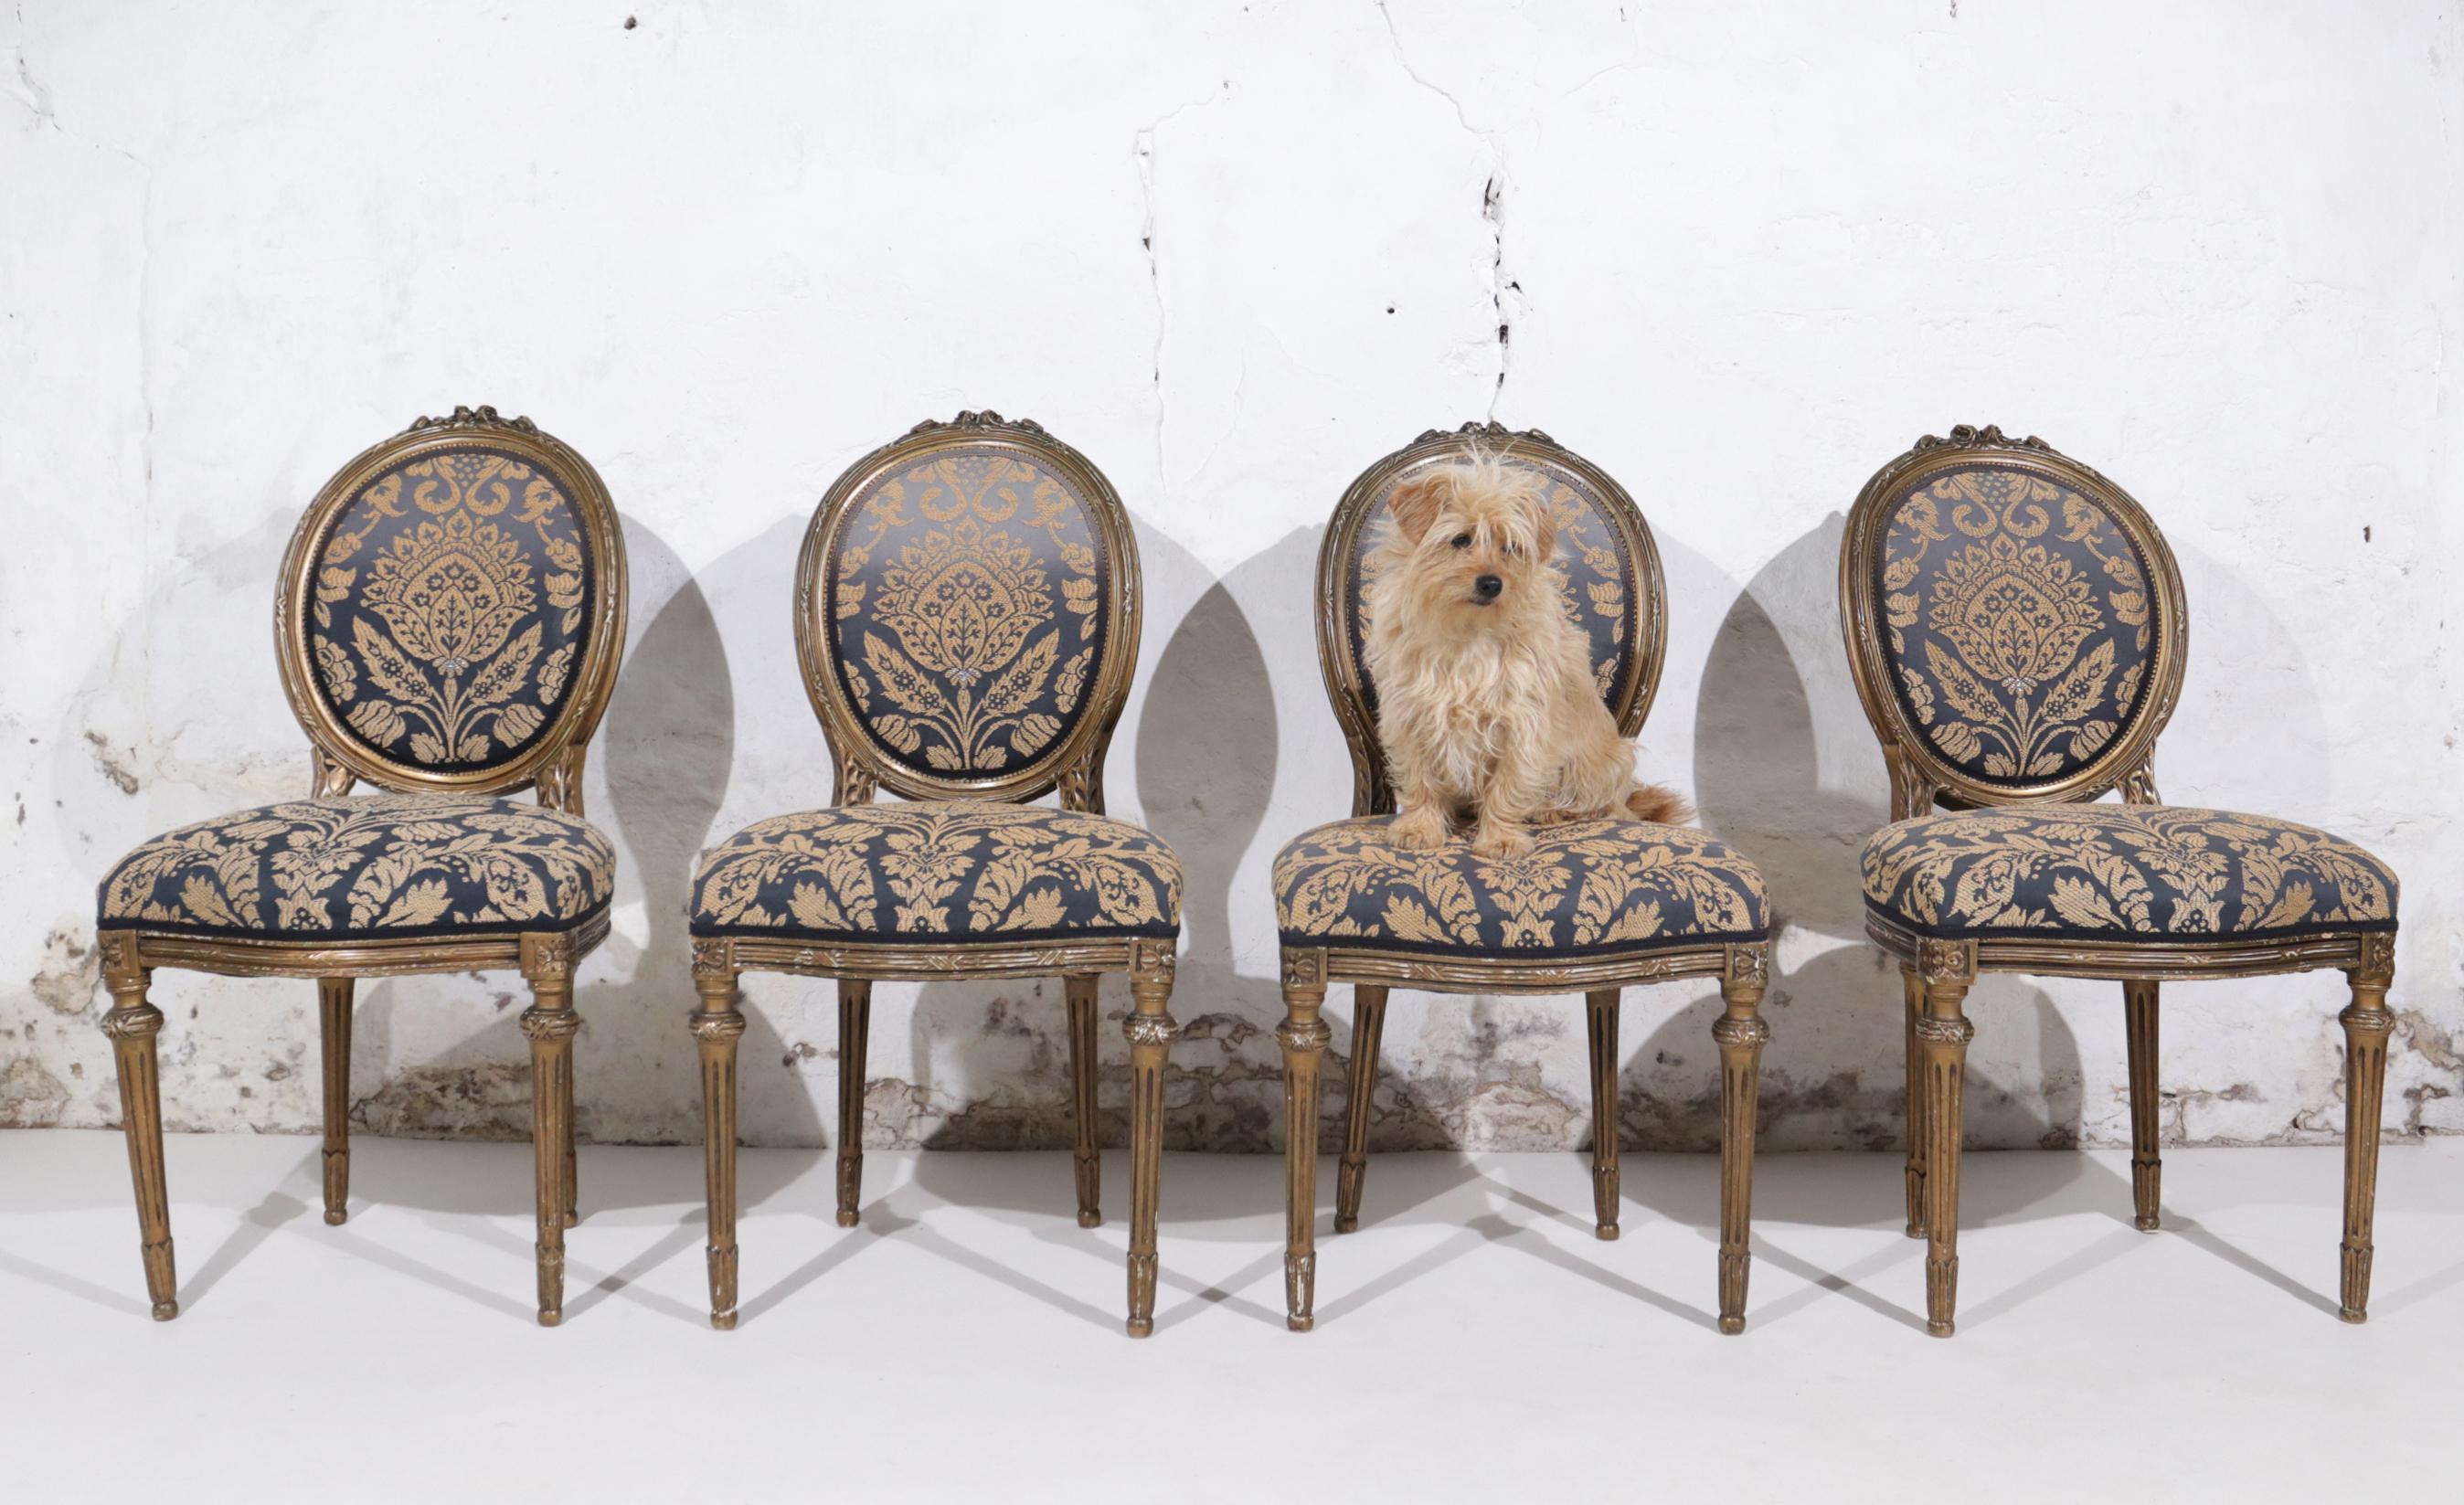 Beautiful Louis XVI side chairs.
Original period pieces, France, circa 1770-1790.
The frame has a gold finish and is weathered, minor losses and old repairs. Despite their advanced age, the chairs are relatively stable, but our advice is to use